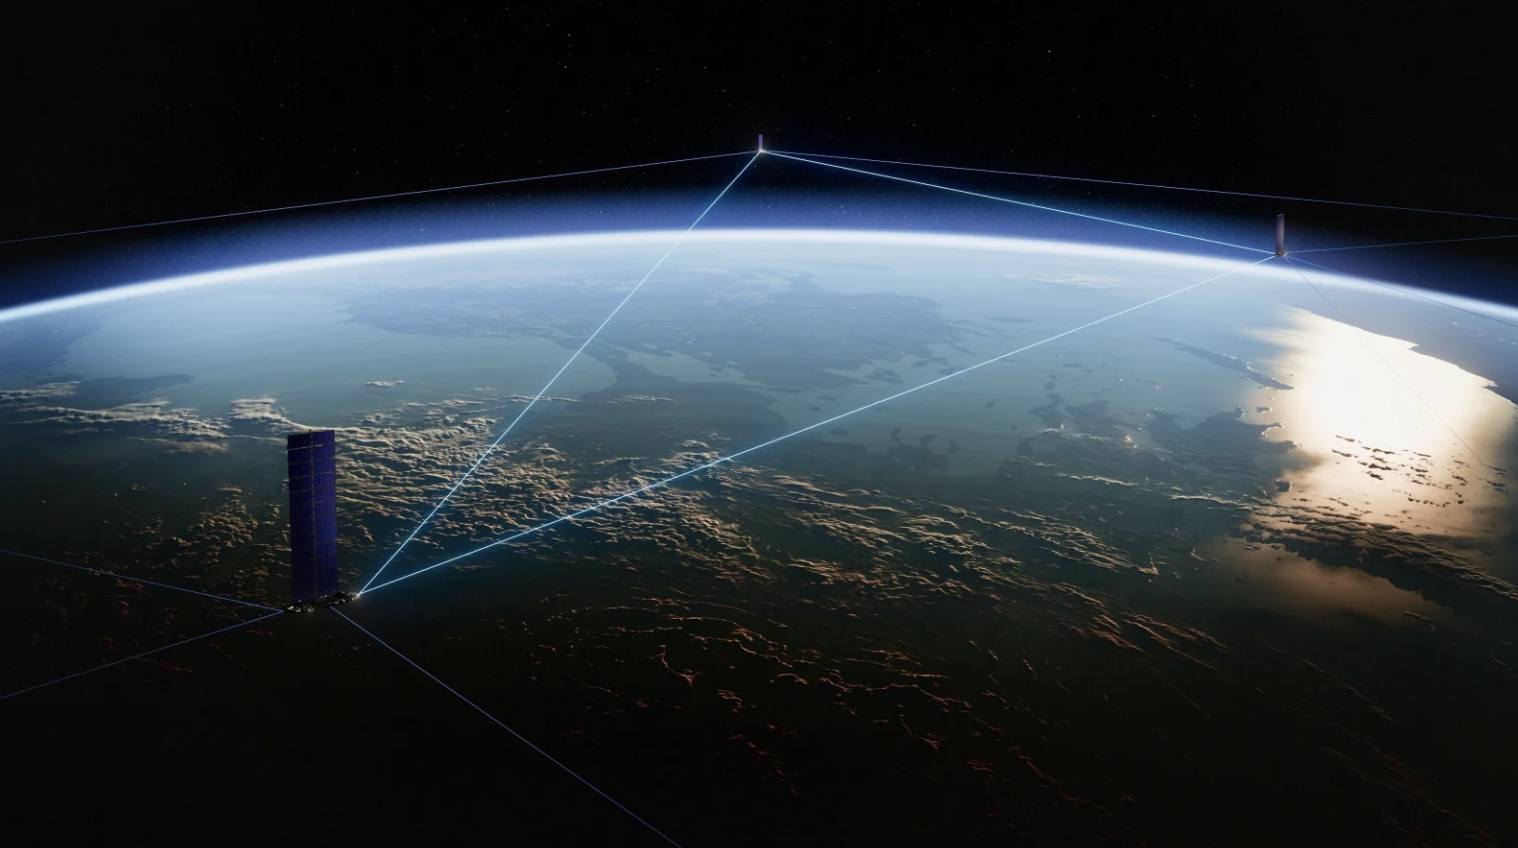 SpaceX's Starlink laser system transmits more than 42 petabytes (42 million GB) every day